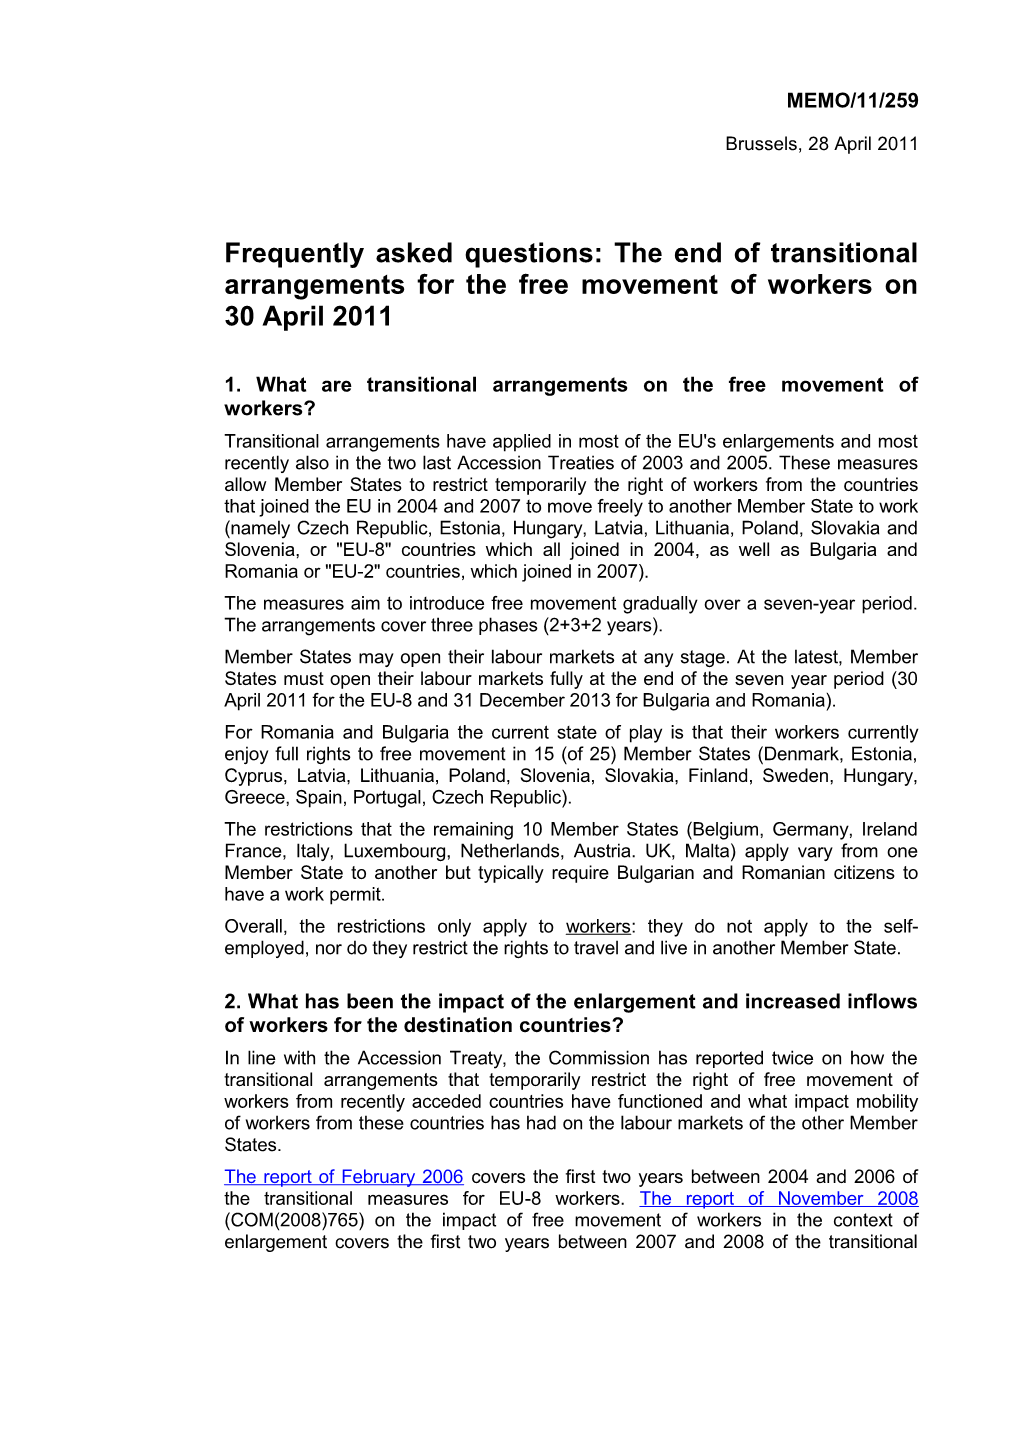 1. What Are Transitional Arrangements on the Free Movement of Workers?